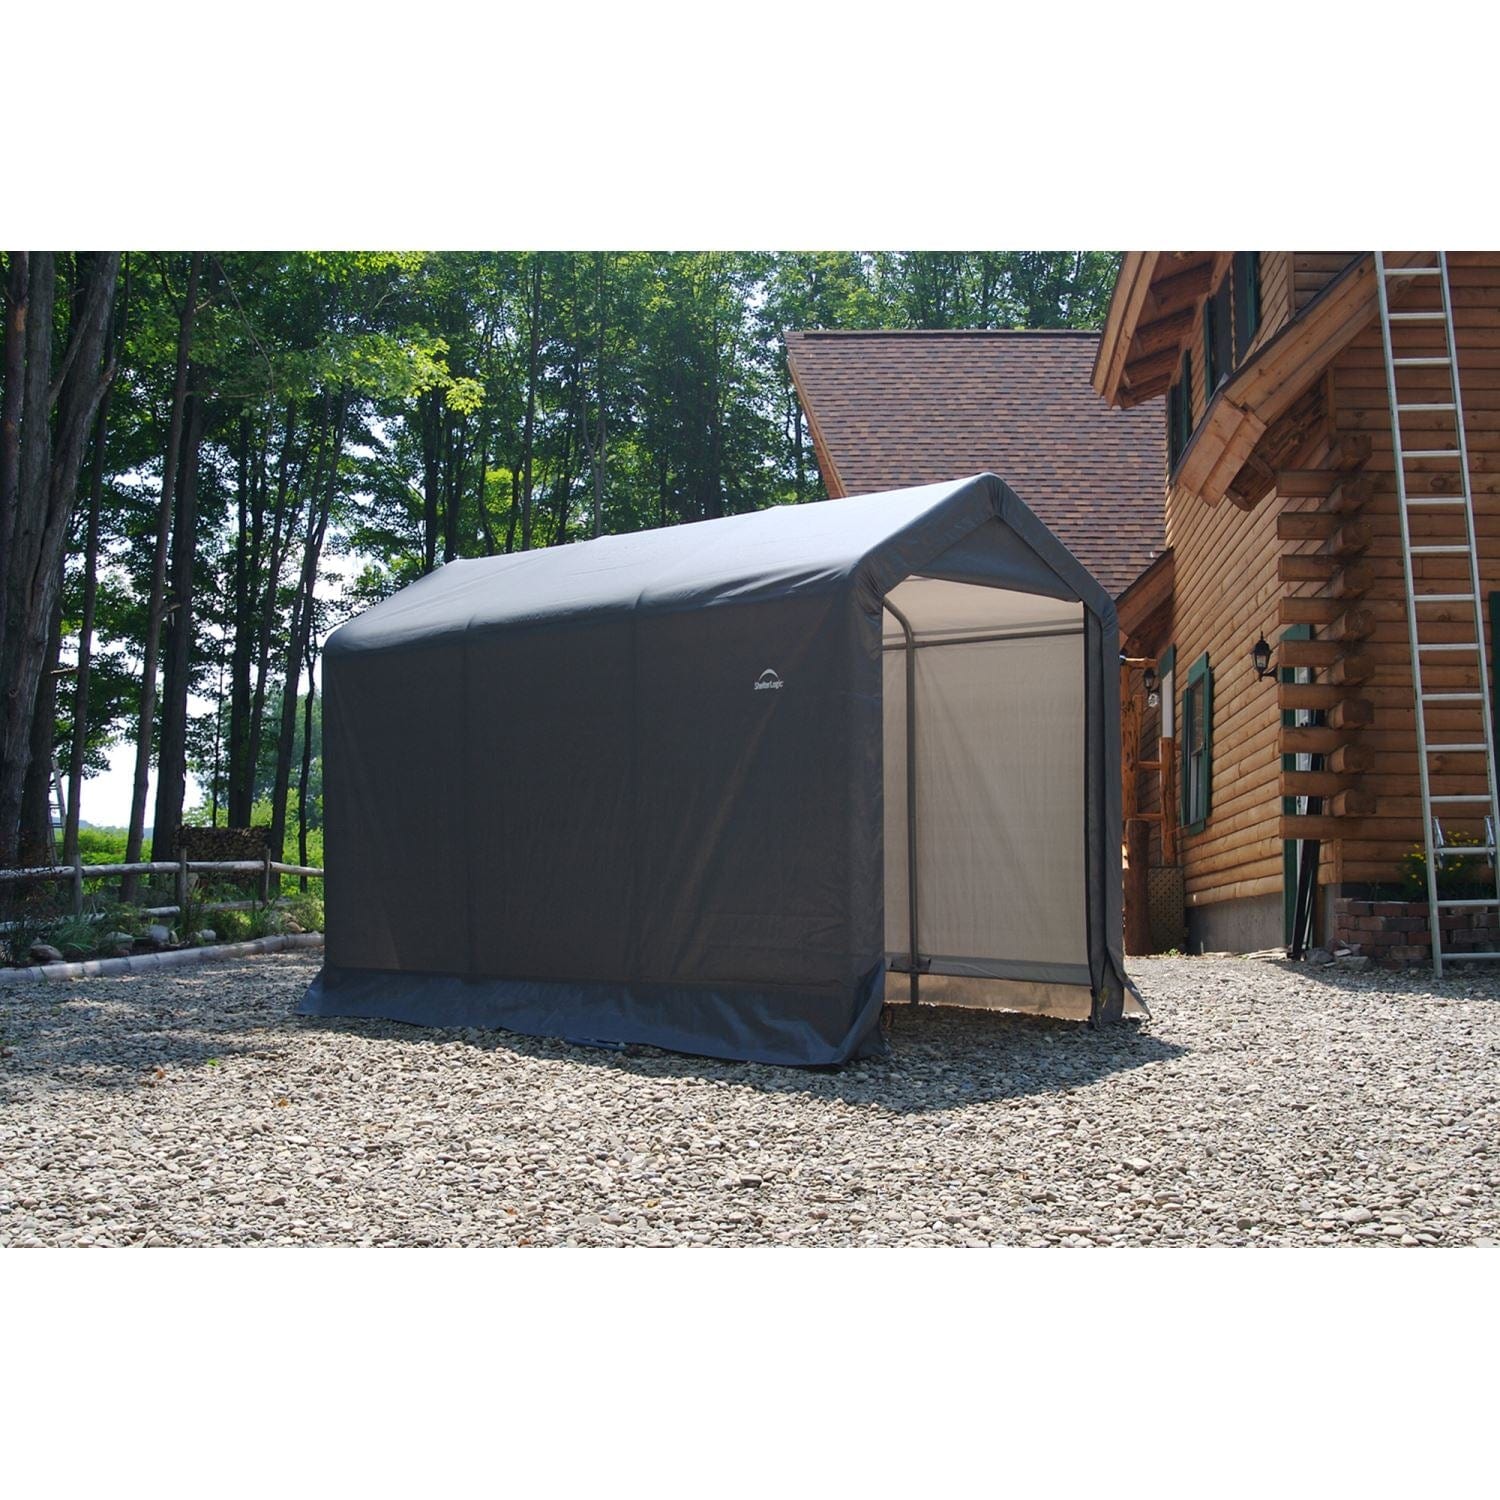 ShelterLogic Shed-in-a-Box 6 x 10 x 6 ft. 6 in. Gray - mygreenhousestore.com